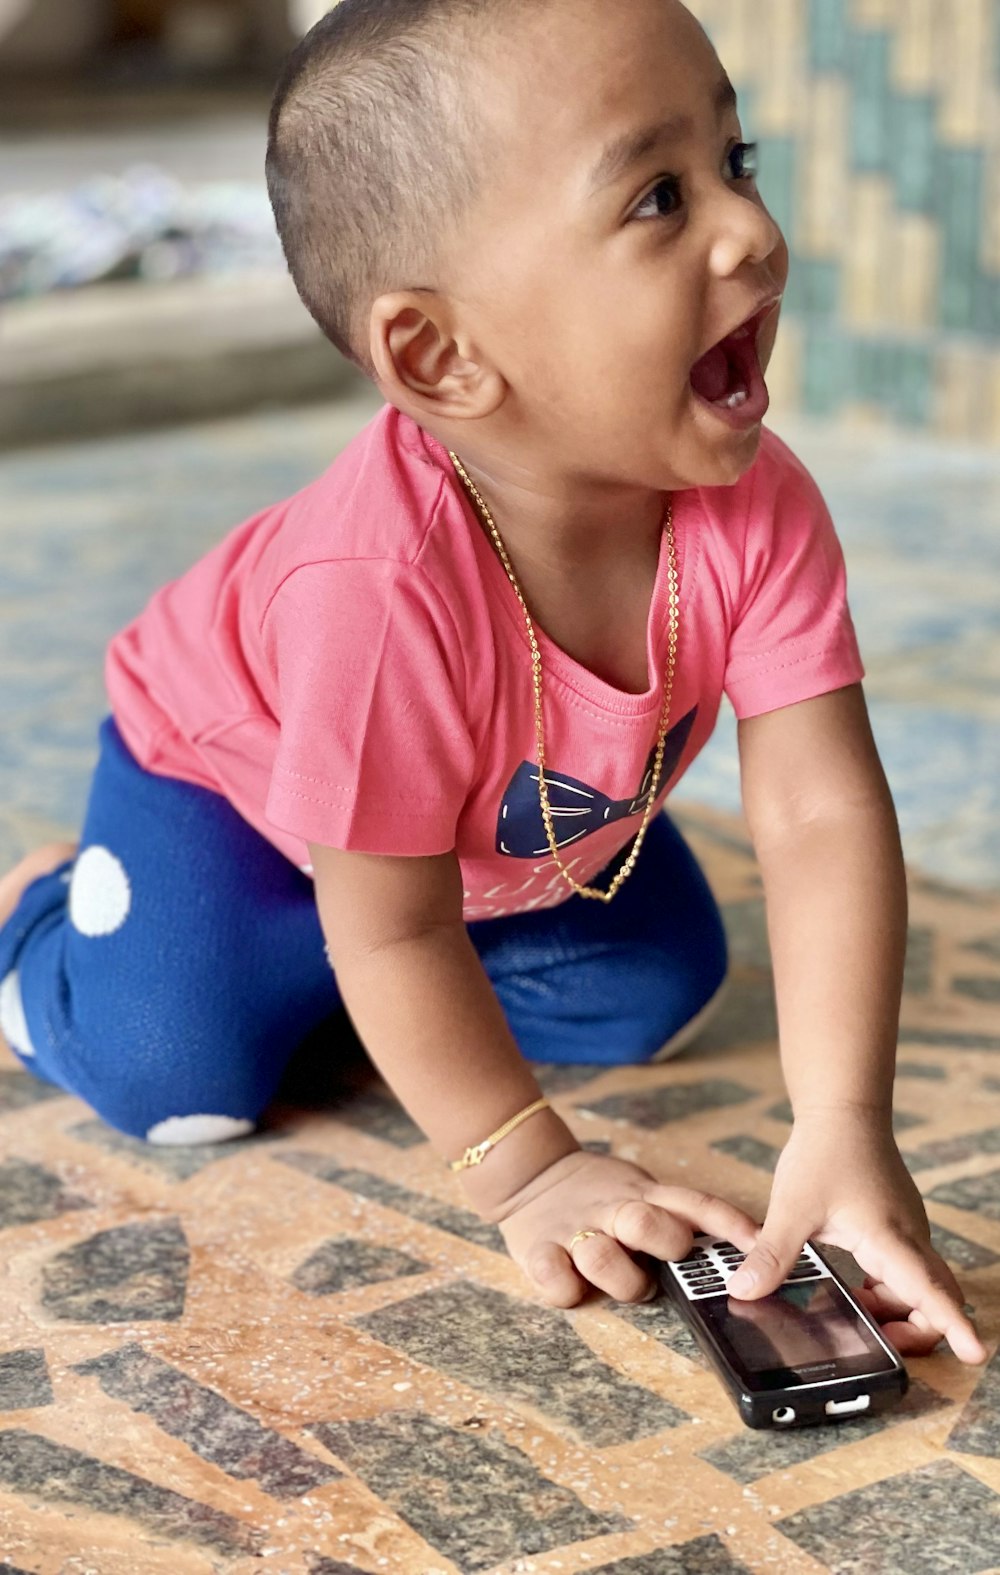 girl in pink shirt and blue pants sitting on floor